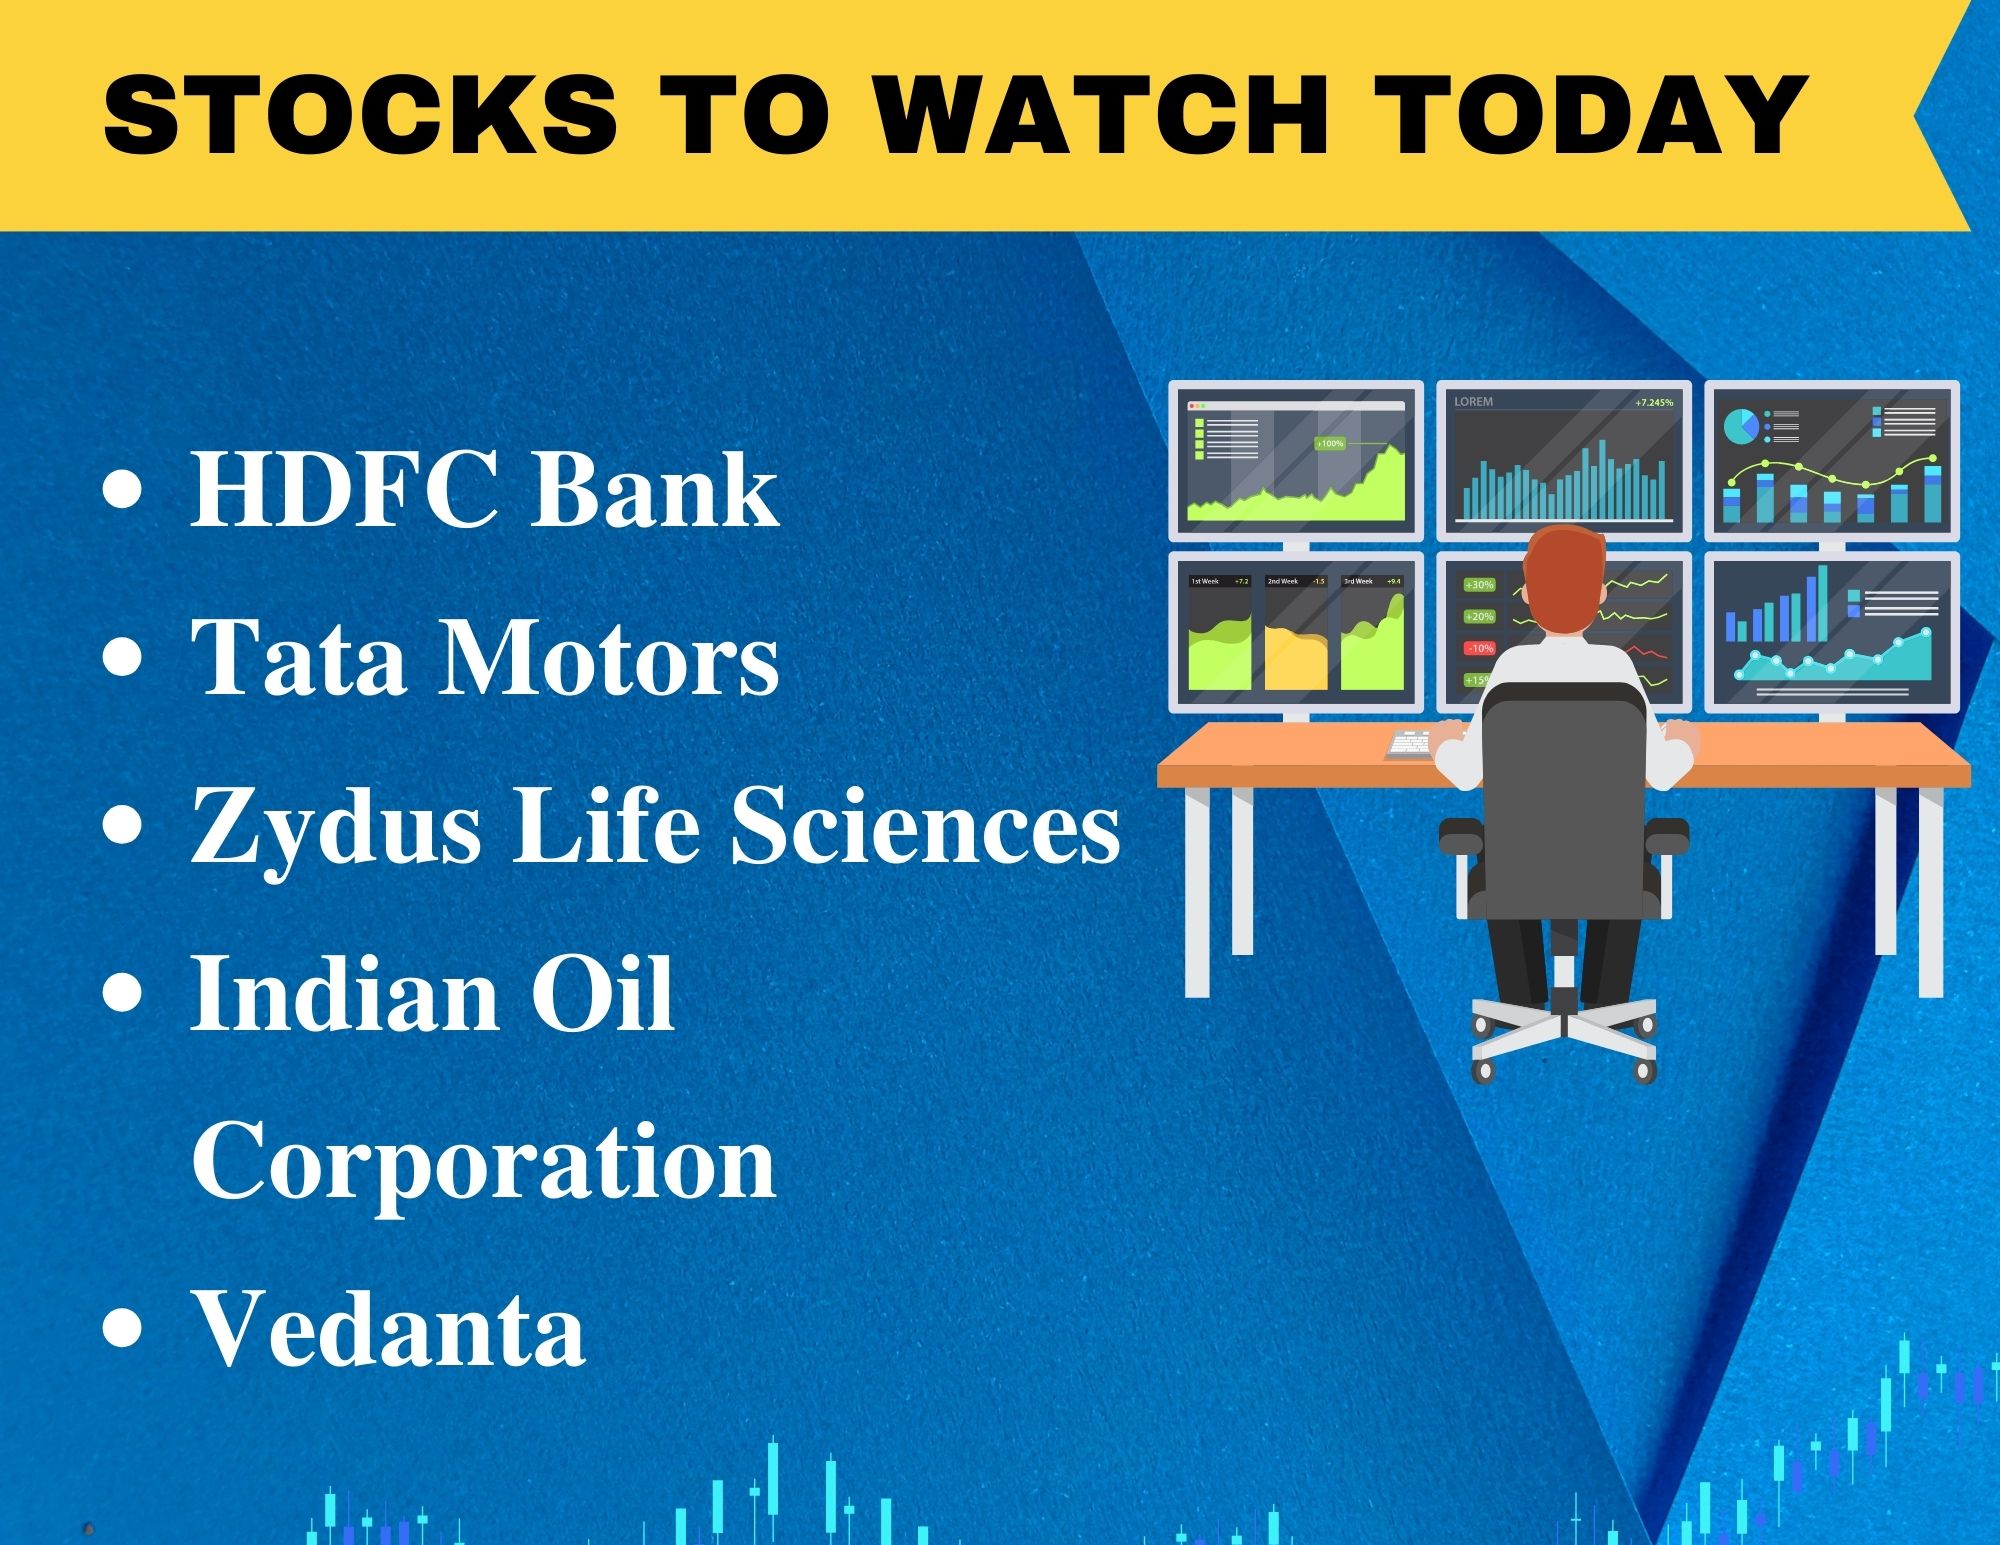 Stocks In News, HDFC Bank, Tata Motors, Zydus Life Sciences And More